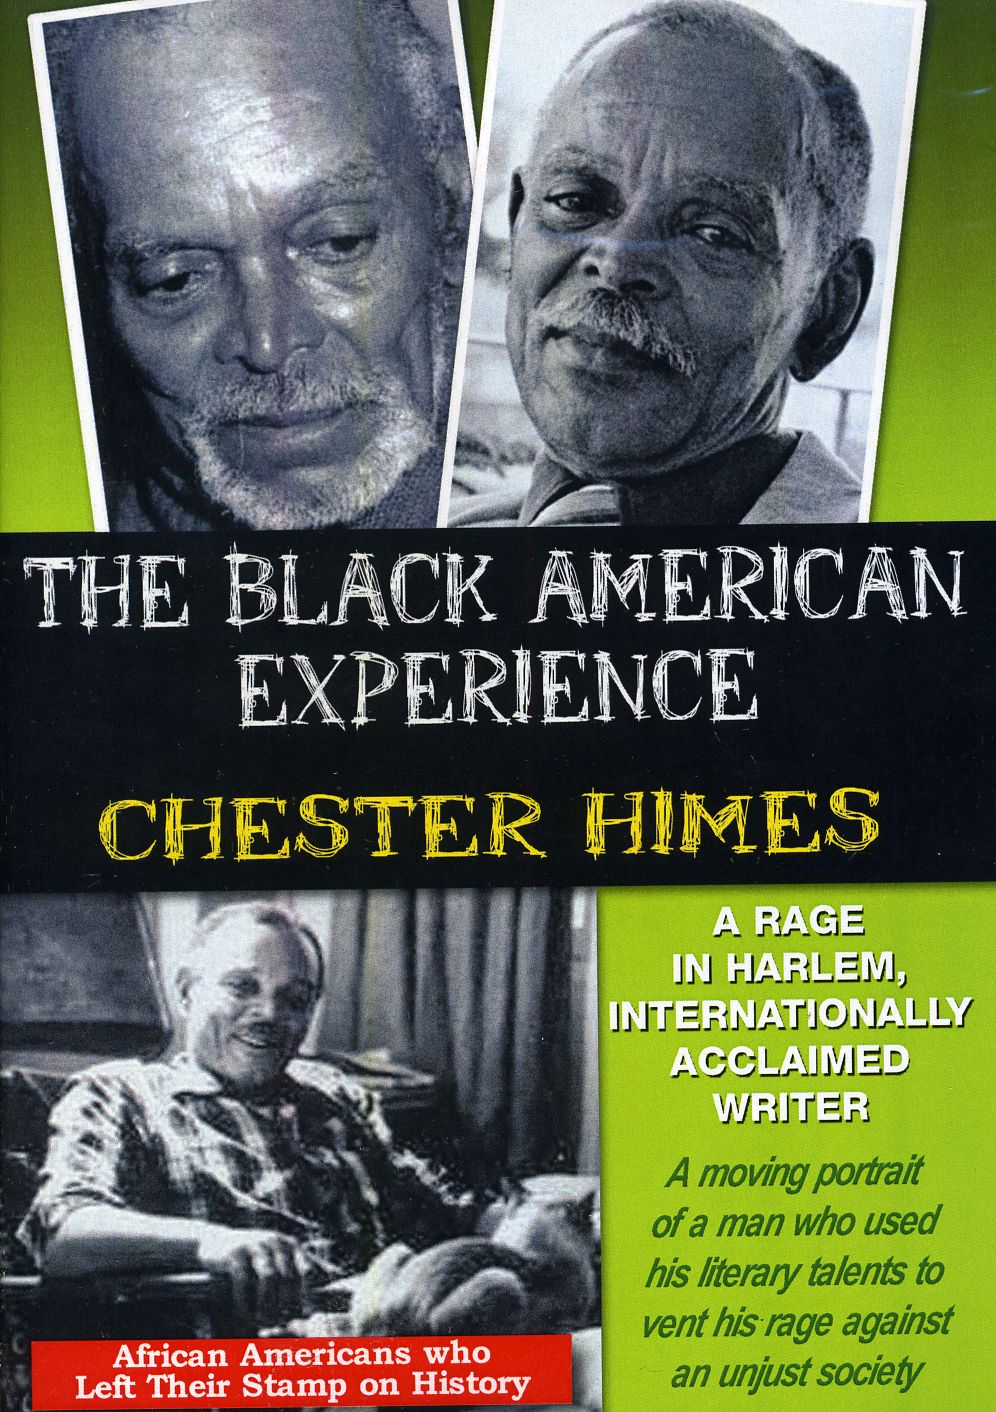 CHESTER HIMES A RAGE IN HARLEM, INTERNATIONALLY AC